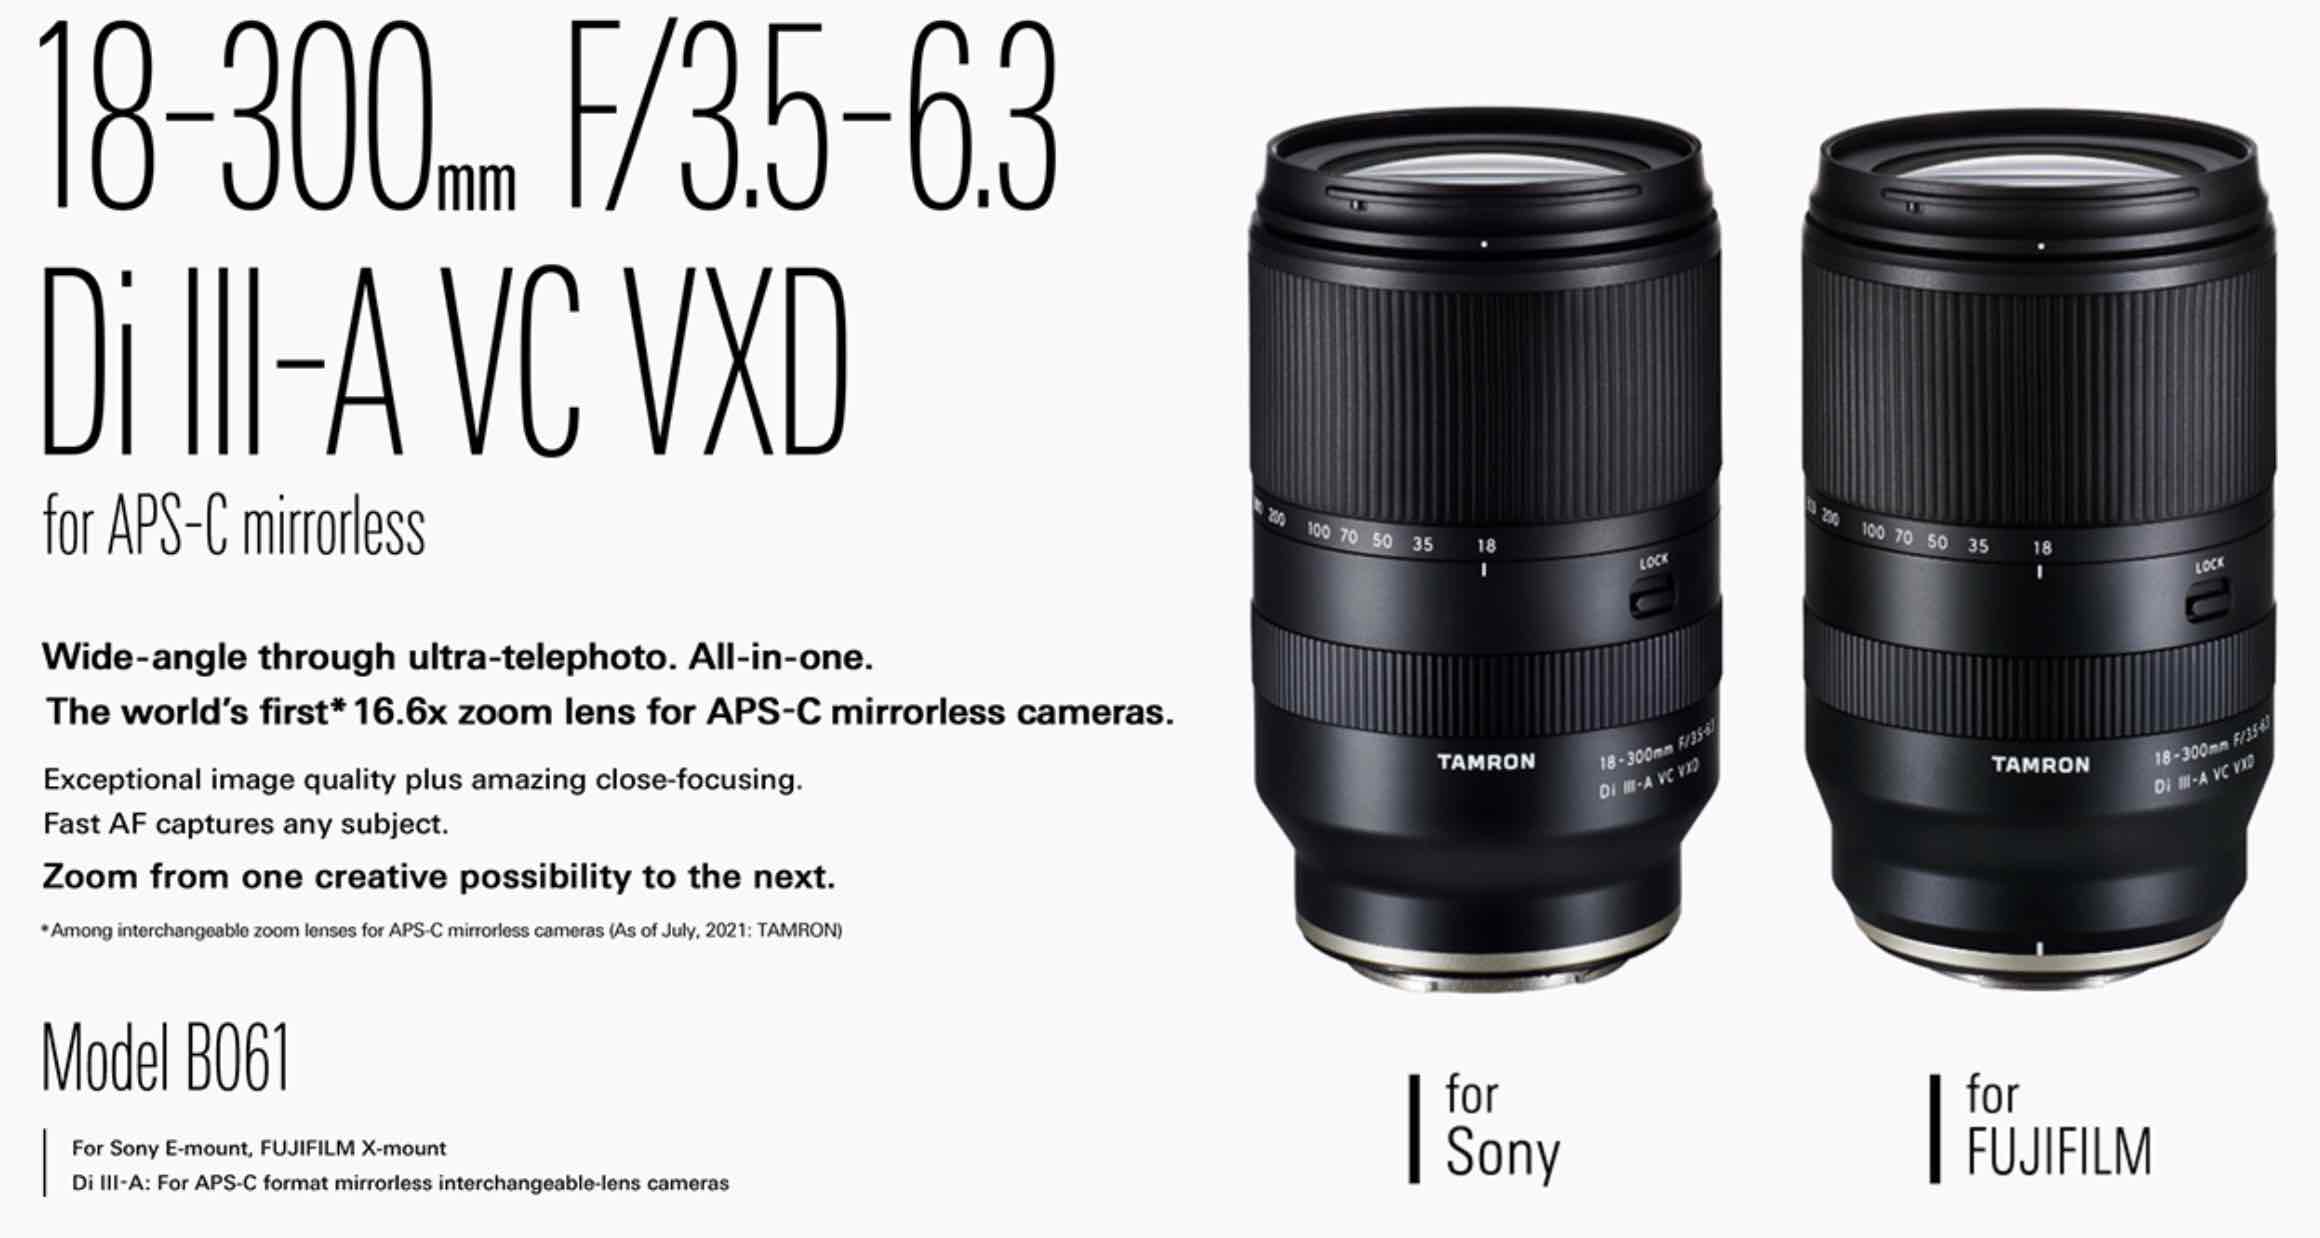 Tamron 18-300mm f/3.5-6.3 Officially Announced - Fuji Rumors